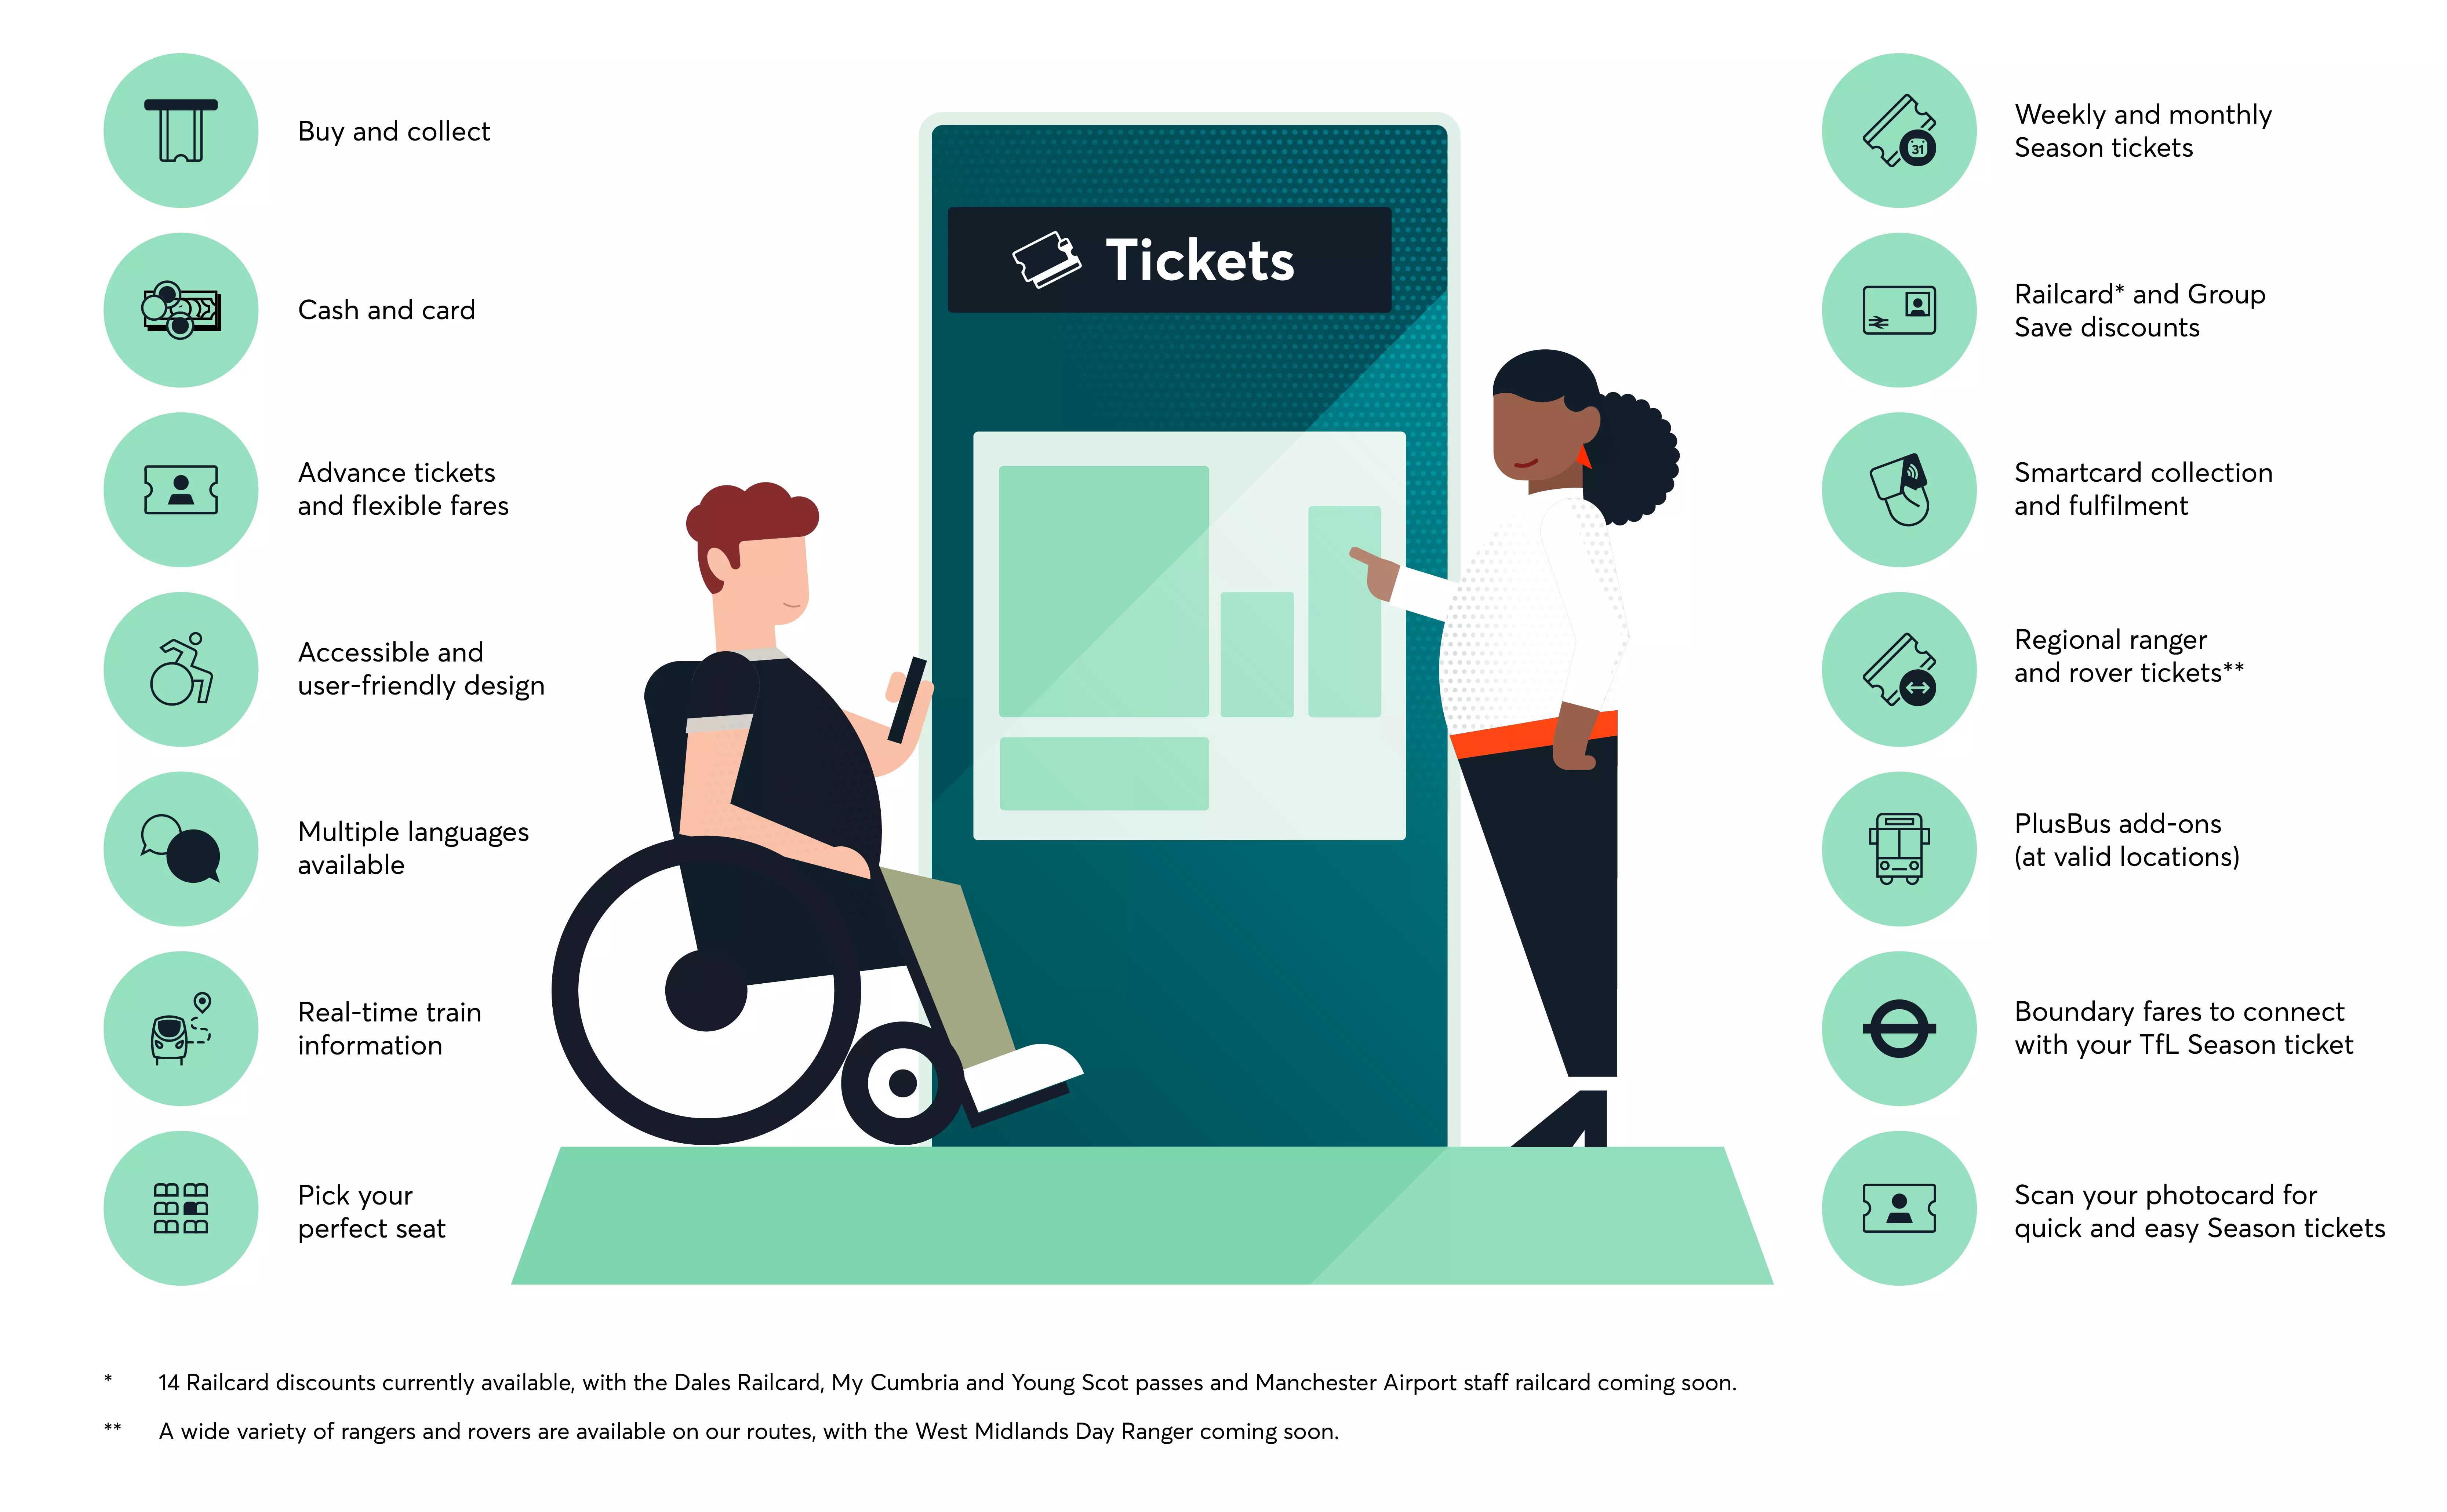 An infographic showing the features of ticket vending machines. In the center, an illustration of a person in a wheelchair and a person standing in front of a ticket vending machine. Features listed on either side of the illustration include: buying and collecting tickets, paying with cash and card, purchasing advance tickets and flexible fares, accessible and user-friendly design, multiple language options, real-time train information, seat selection, weekly and monthly season ticket purchase, Railcard and group save discounts - 14 Railcard discounts are currently available, with Dales Railcard,My Cumbria and Young Scot passes, and Manchester Airport staff railcards coming soon, smartcard collection and fulfillment, regional ranger and rover tickets - a wide variety of rangers and rovers are available on our routes, with the West Midlands Day Rangers coming soon, plus bus add-ons, boundary fares to connect with Transport for London season tickets, and scanning photocard for quick and easy season ticket purchase.